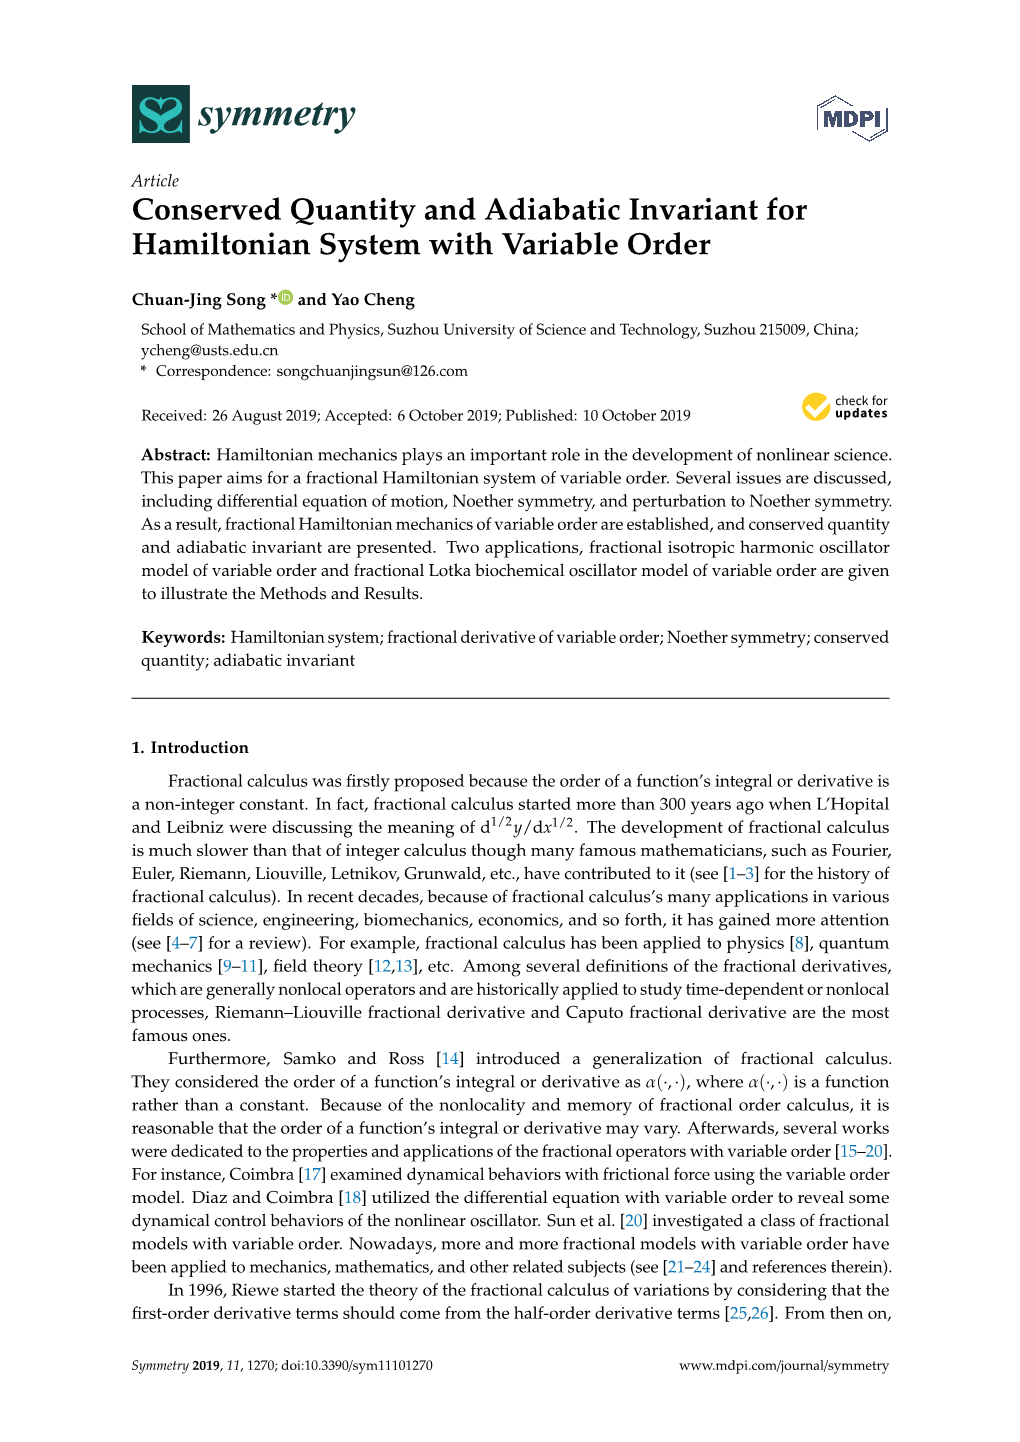 Conserved Quantity and Adiabatic Invariant for Hamiltonian System with Variable Order